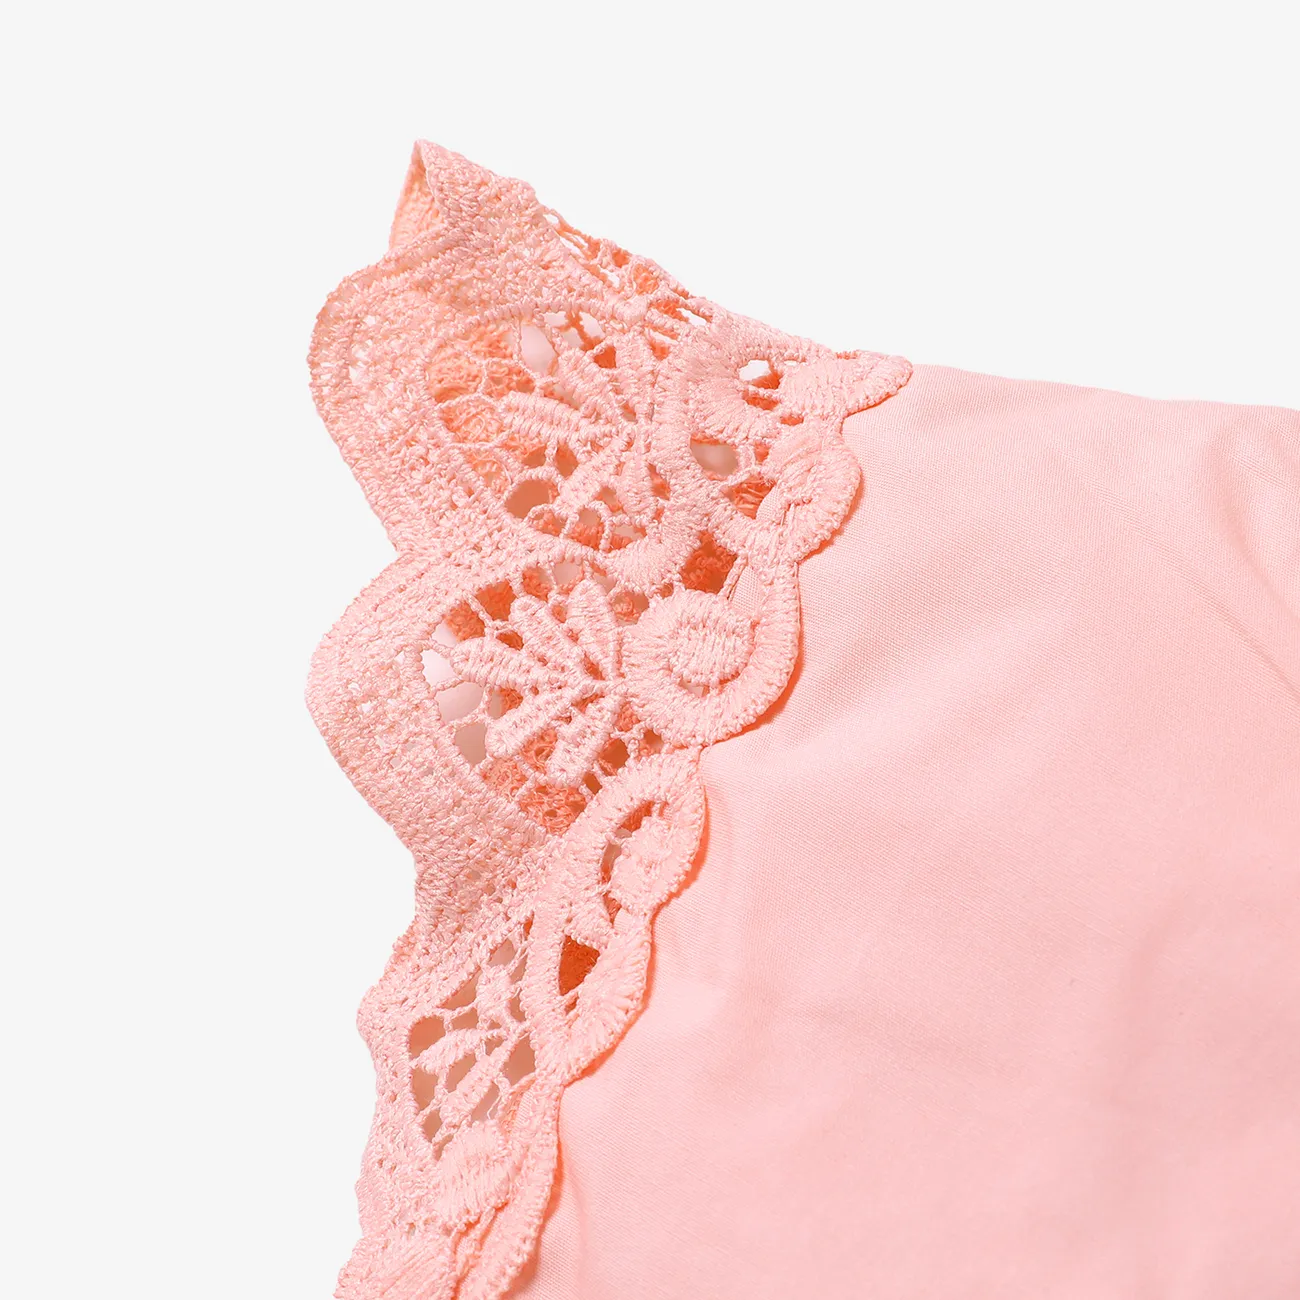 2pcs Baby Girl 95% Cotton Lace Flutter-sleeve Floral Print Romper with Headband Set Pink big image 1